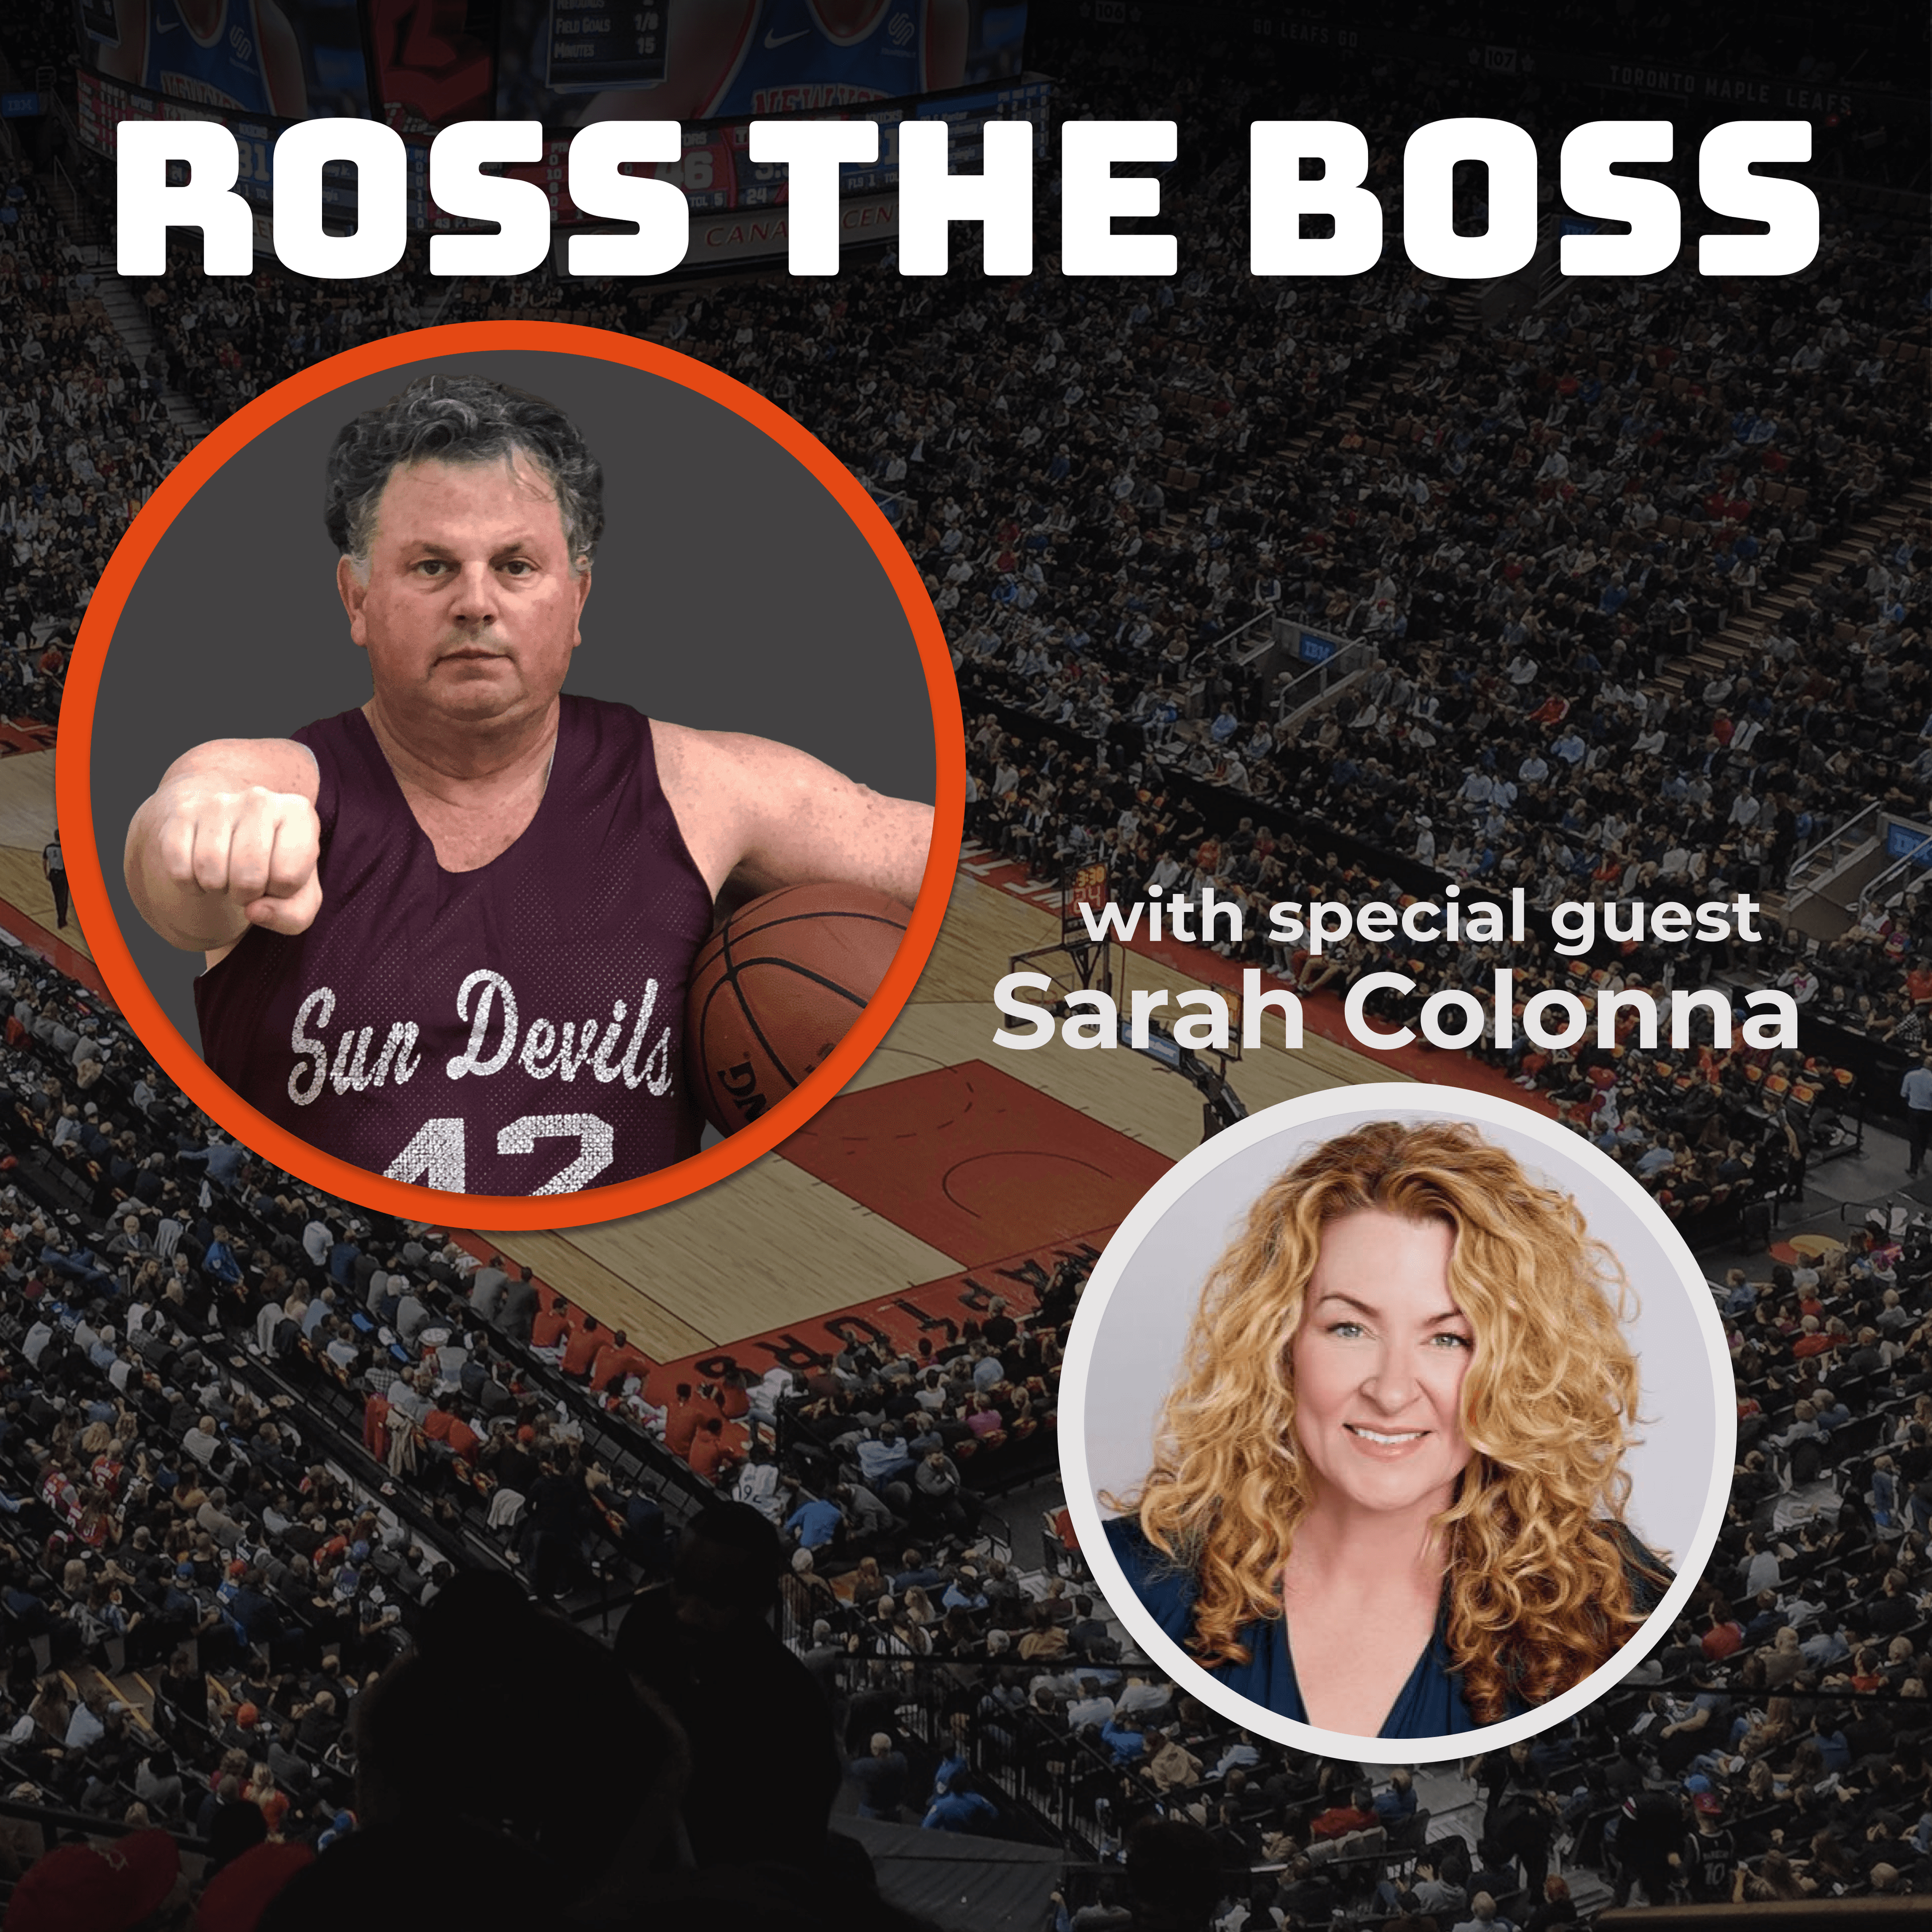 Ross the Boss with Comedian Sarah Colonna